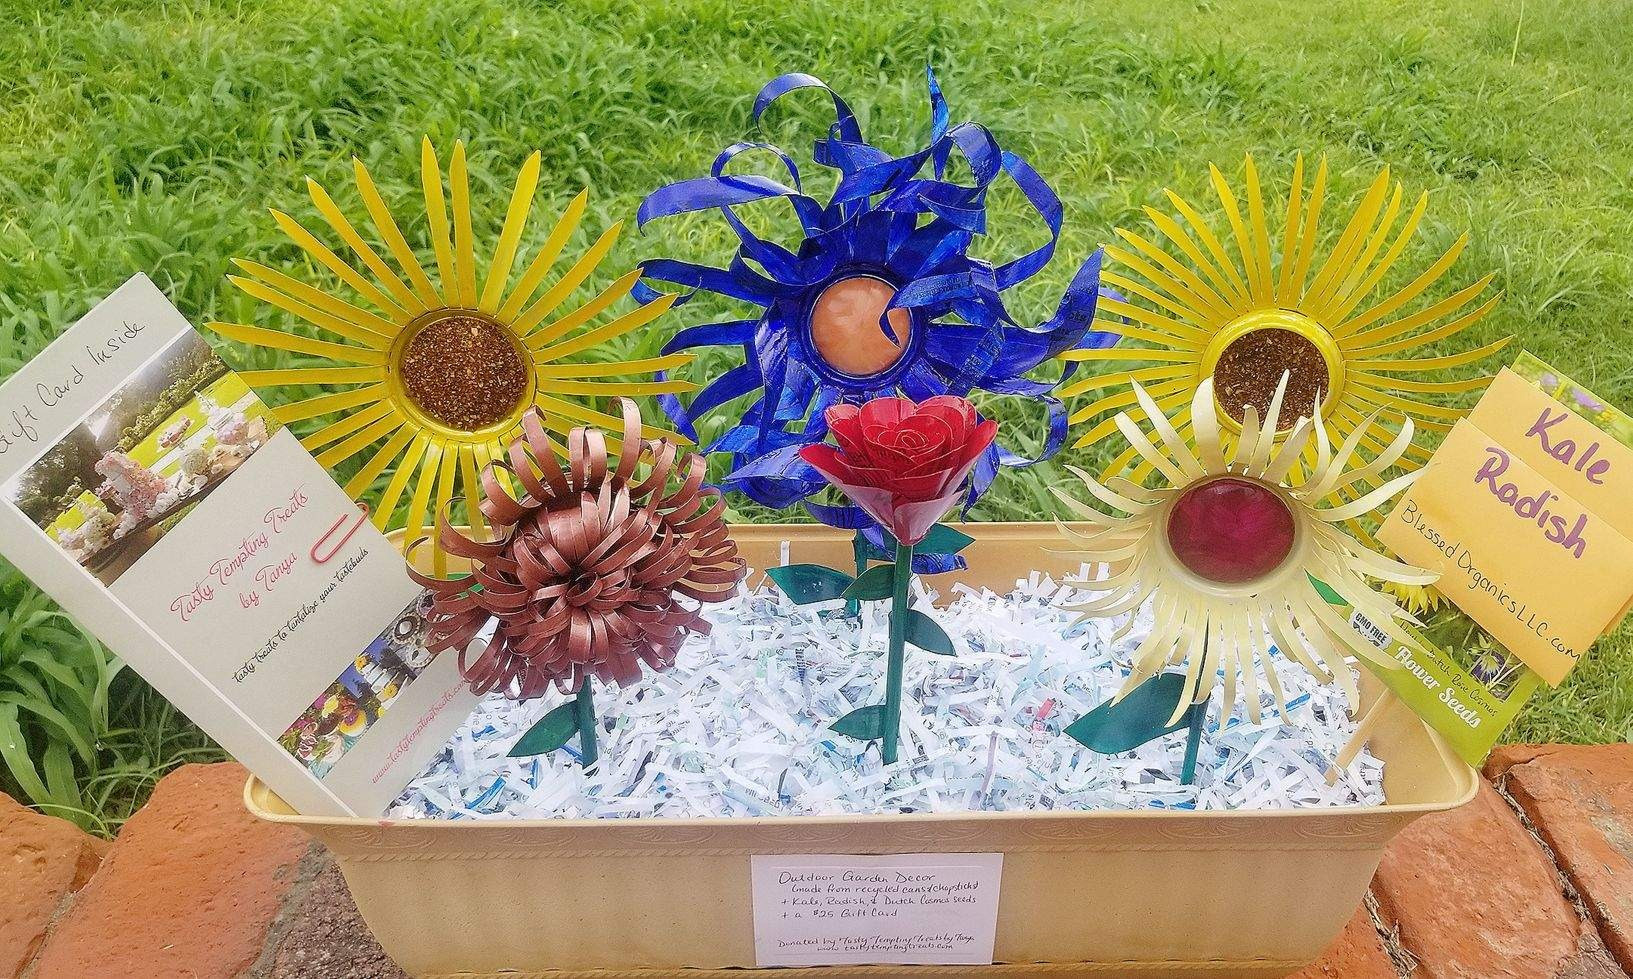 ECO Art Challenge Participant- Local artist, Tanya von Mittenwald, stepped up to the GHP challenge of creating a work from recycled materials strictly for this event. Not only did she knock it out of the park with her flower scu;pture, but she also included seed packs & a $25 gift card in her bundle for auction!